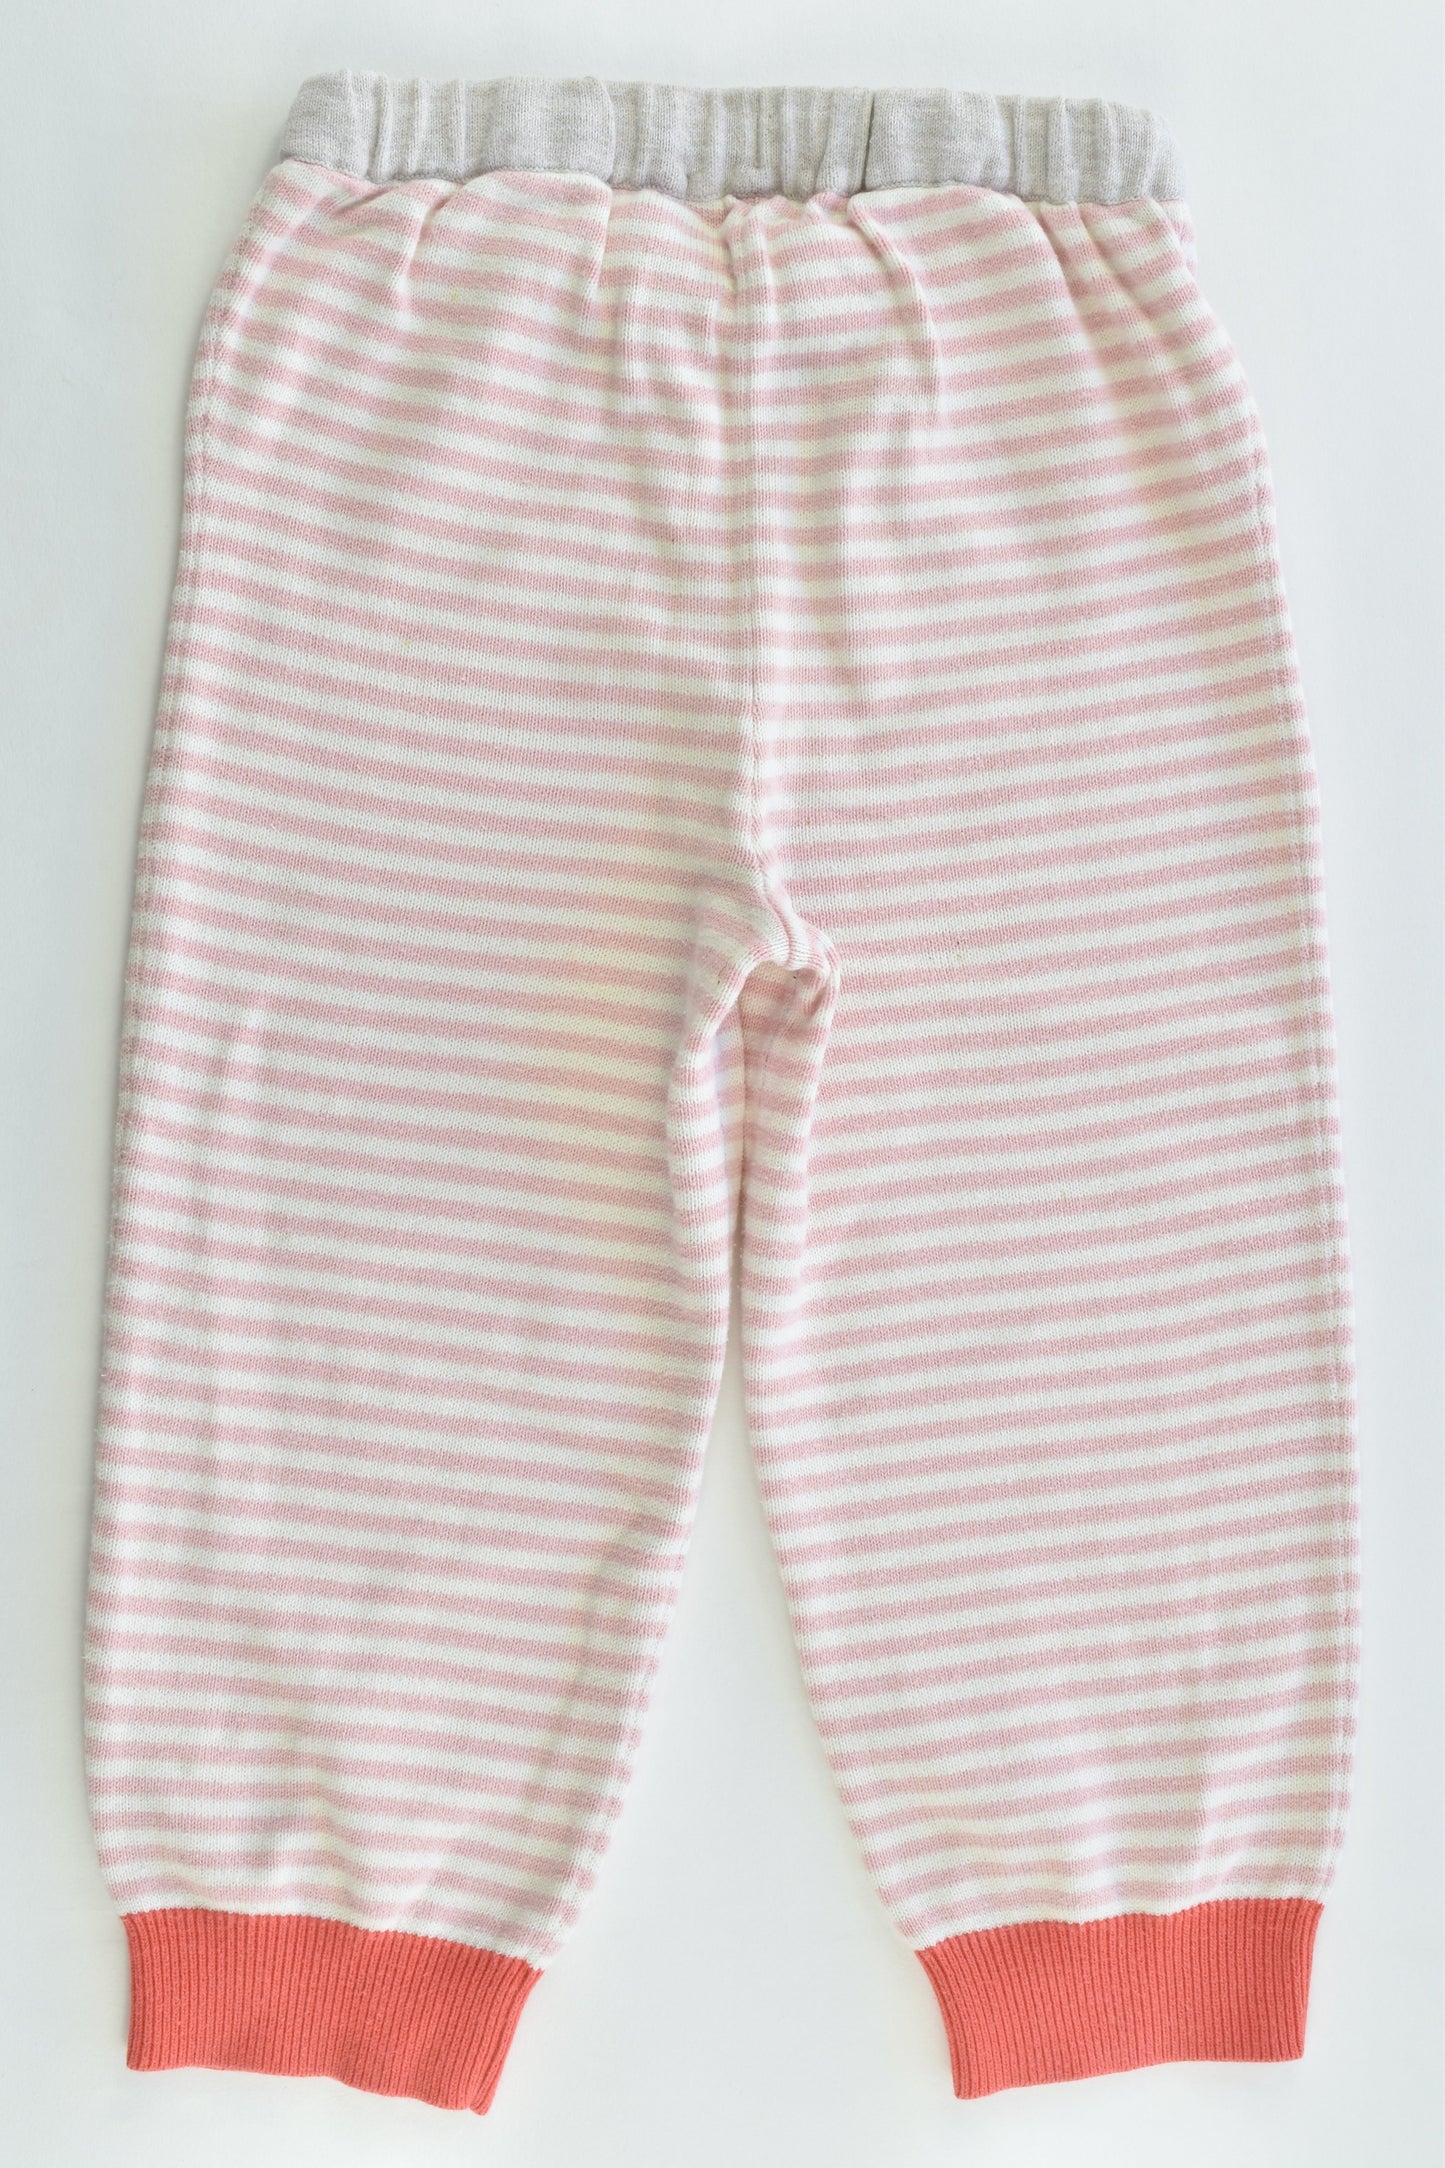 Baby Boden Size 18-24 months Knitted Pants